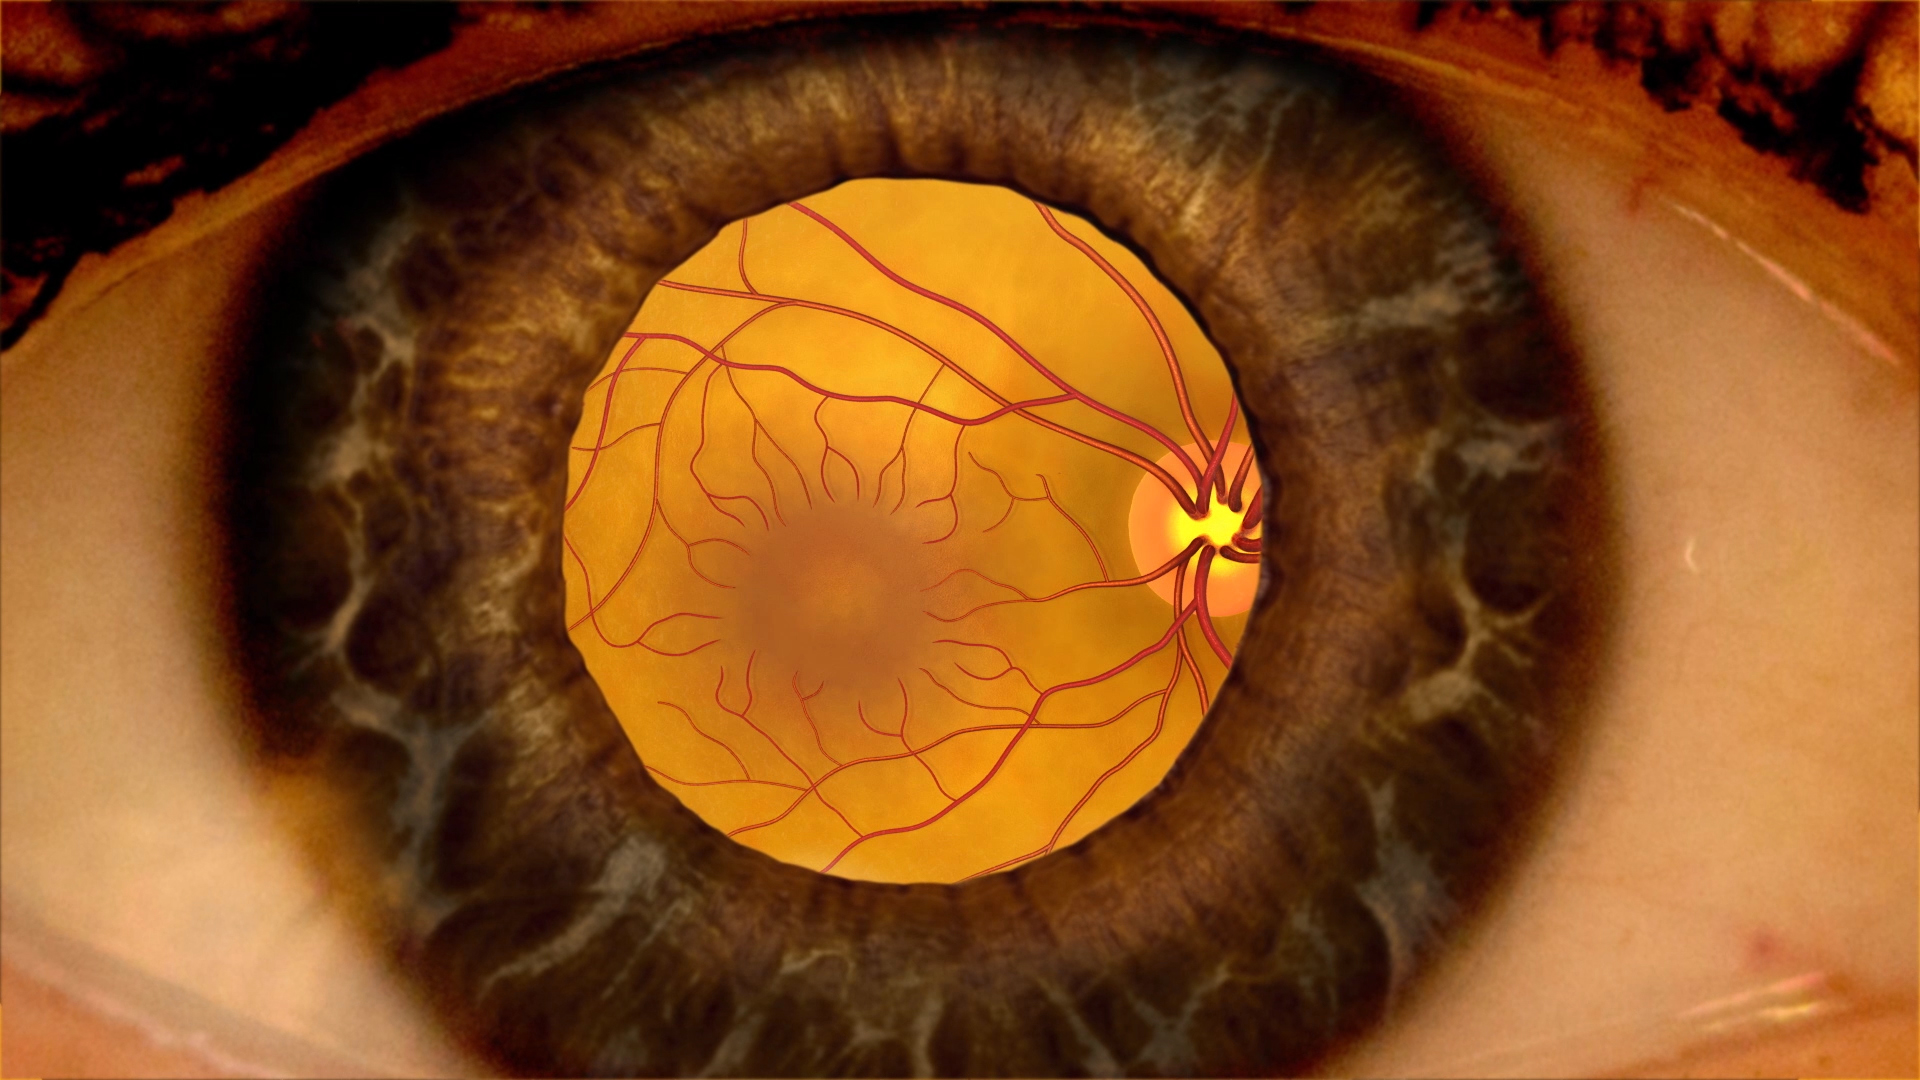 eylea-outperforms-other-drugs-for-diabetic-macular-edema-with-moderate